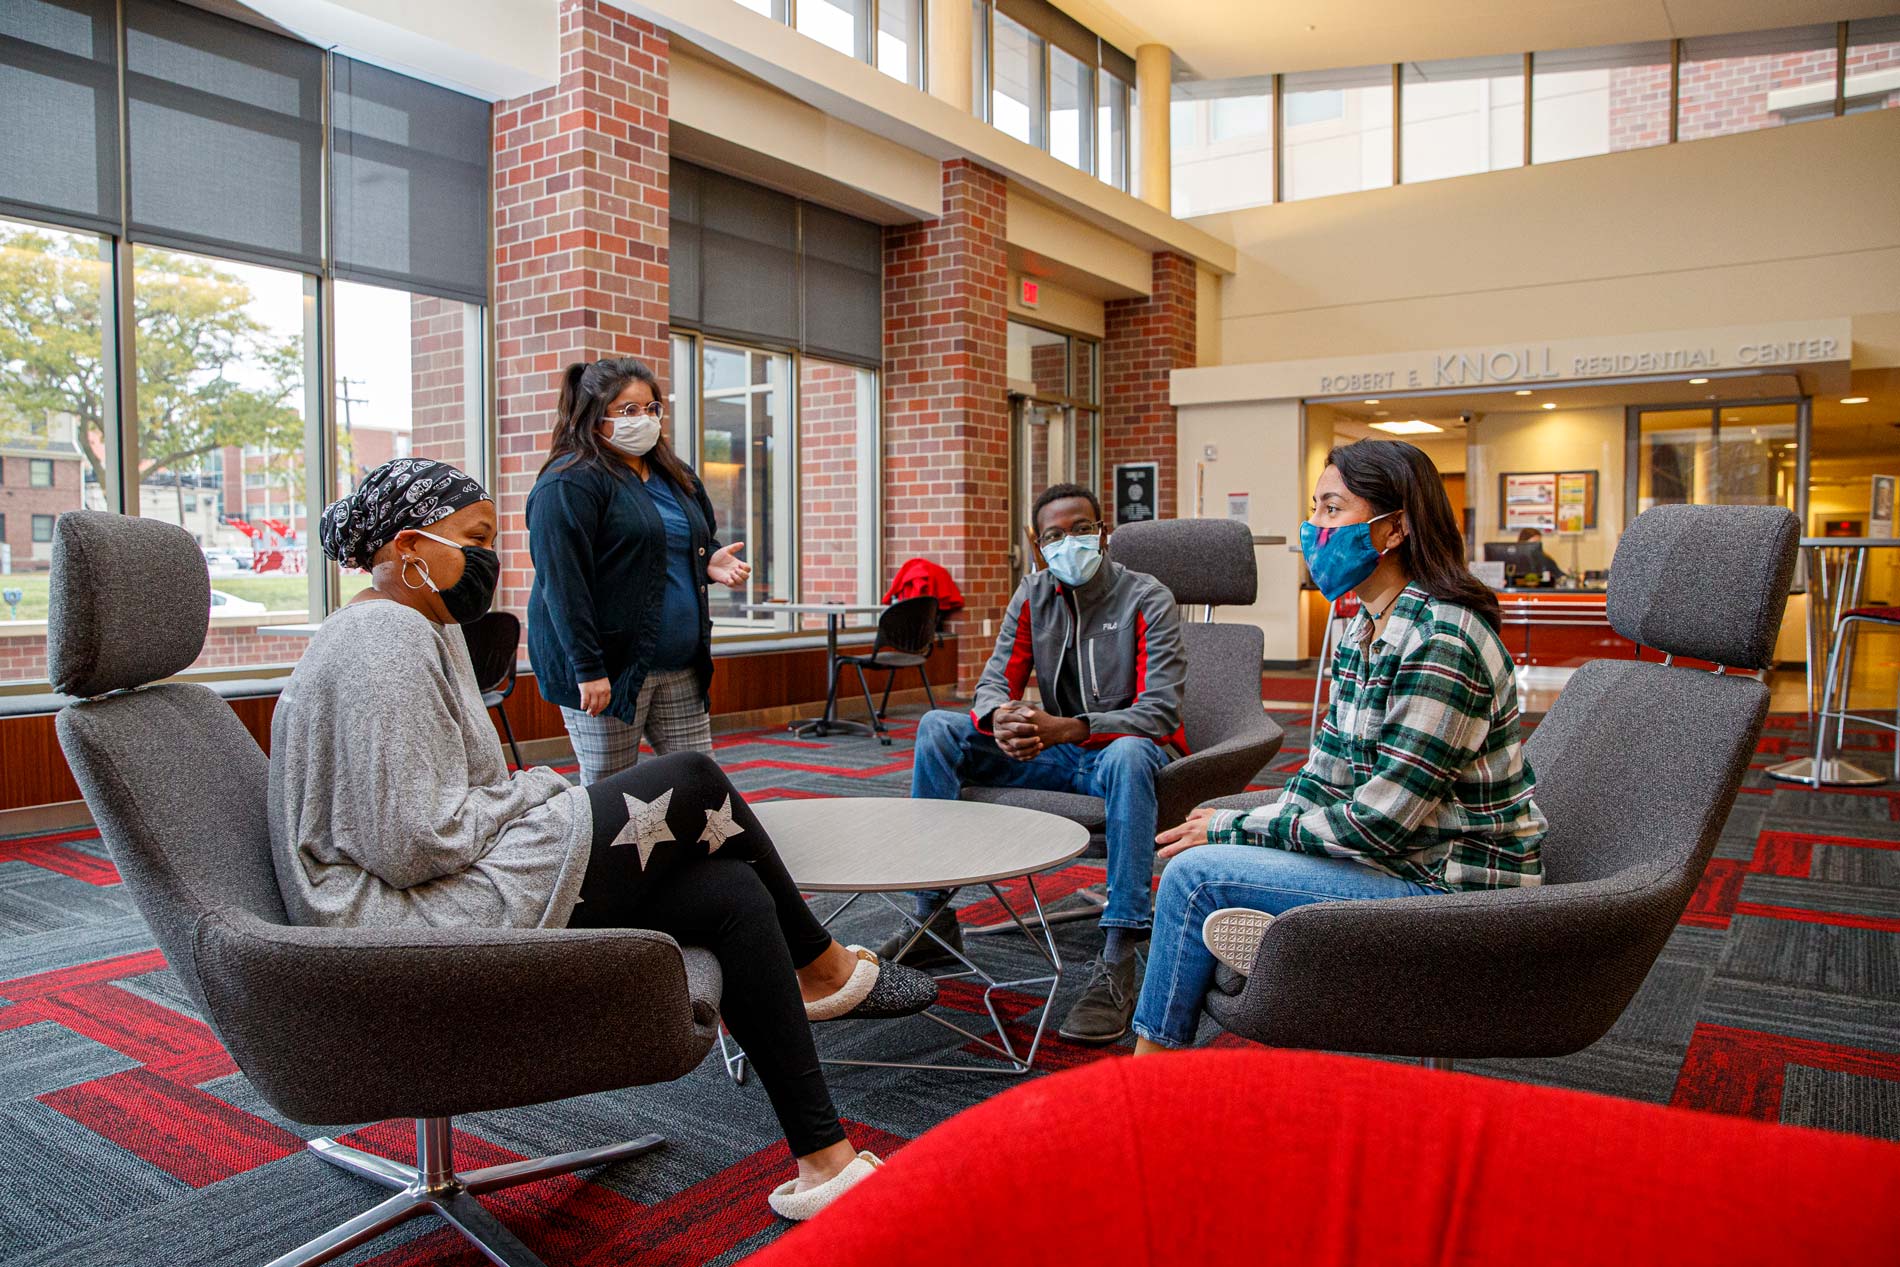 New opportunities for residential students to connect will take place in Spring 2021.